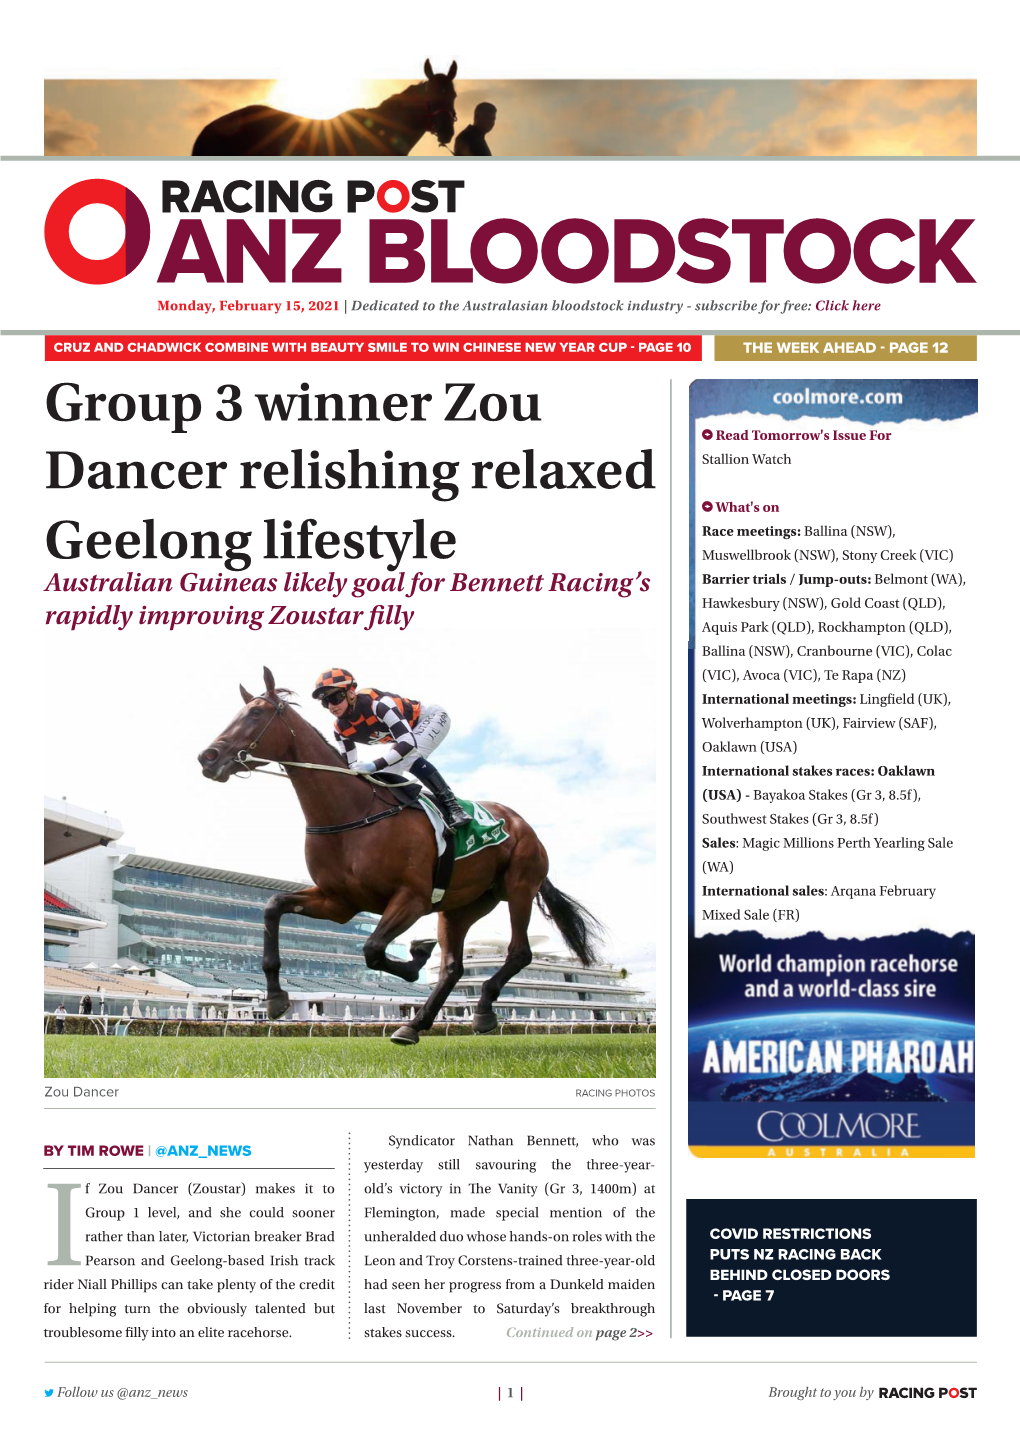 Group 3 Winner Zou Dancer Relishing Relaxed Geelong Lifestyle | 2 | Monday, February 15, 2021